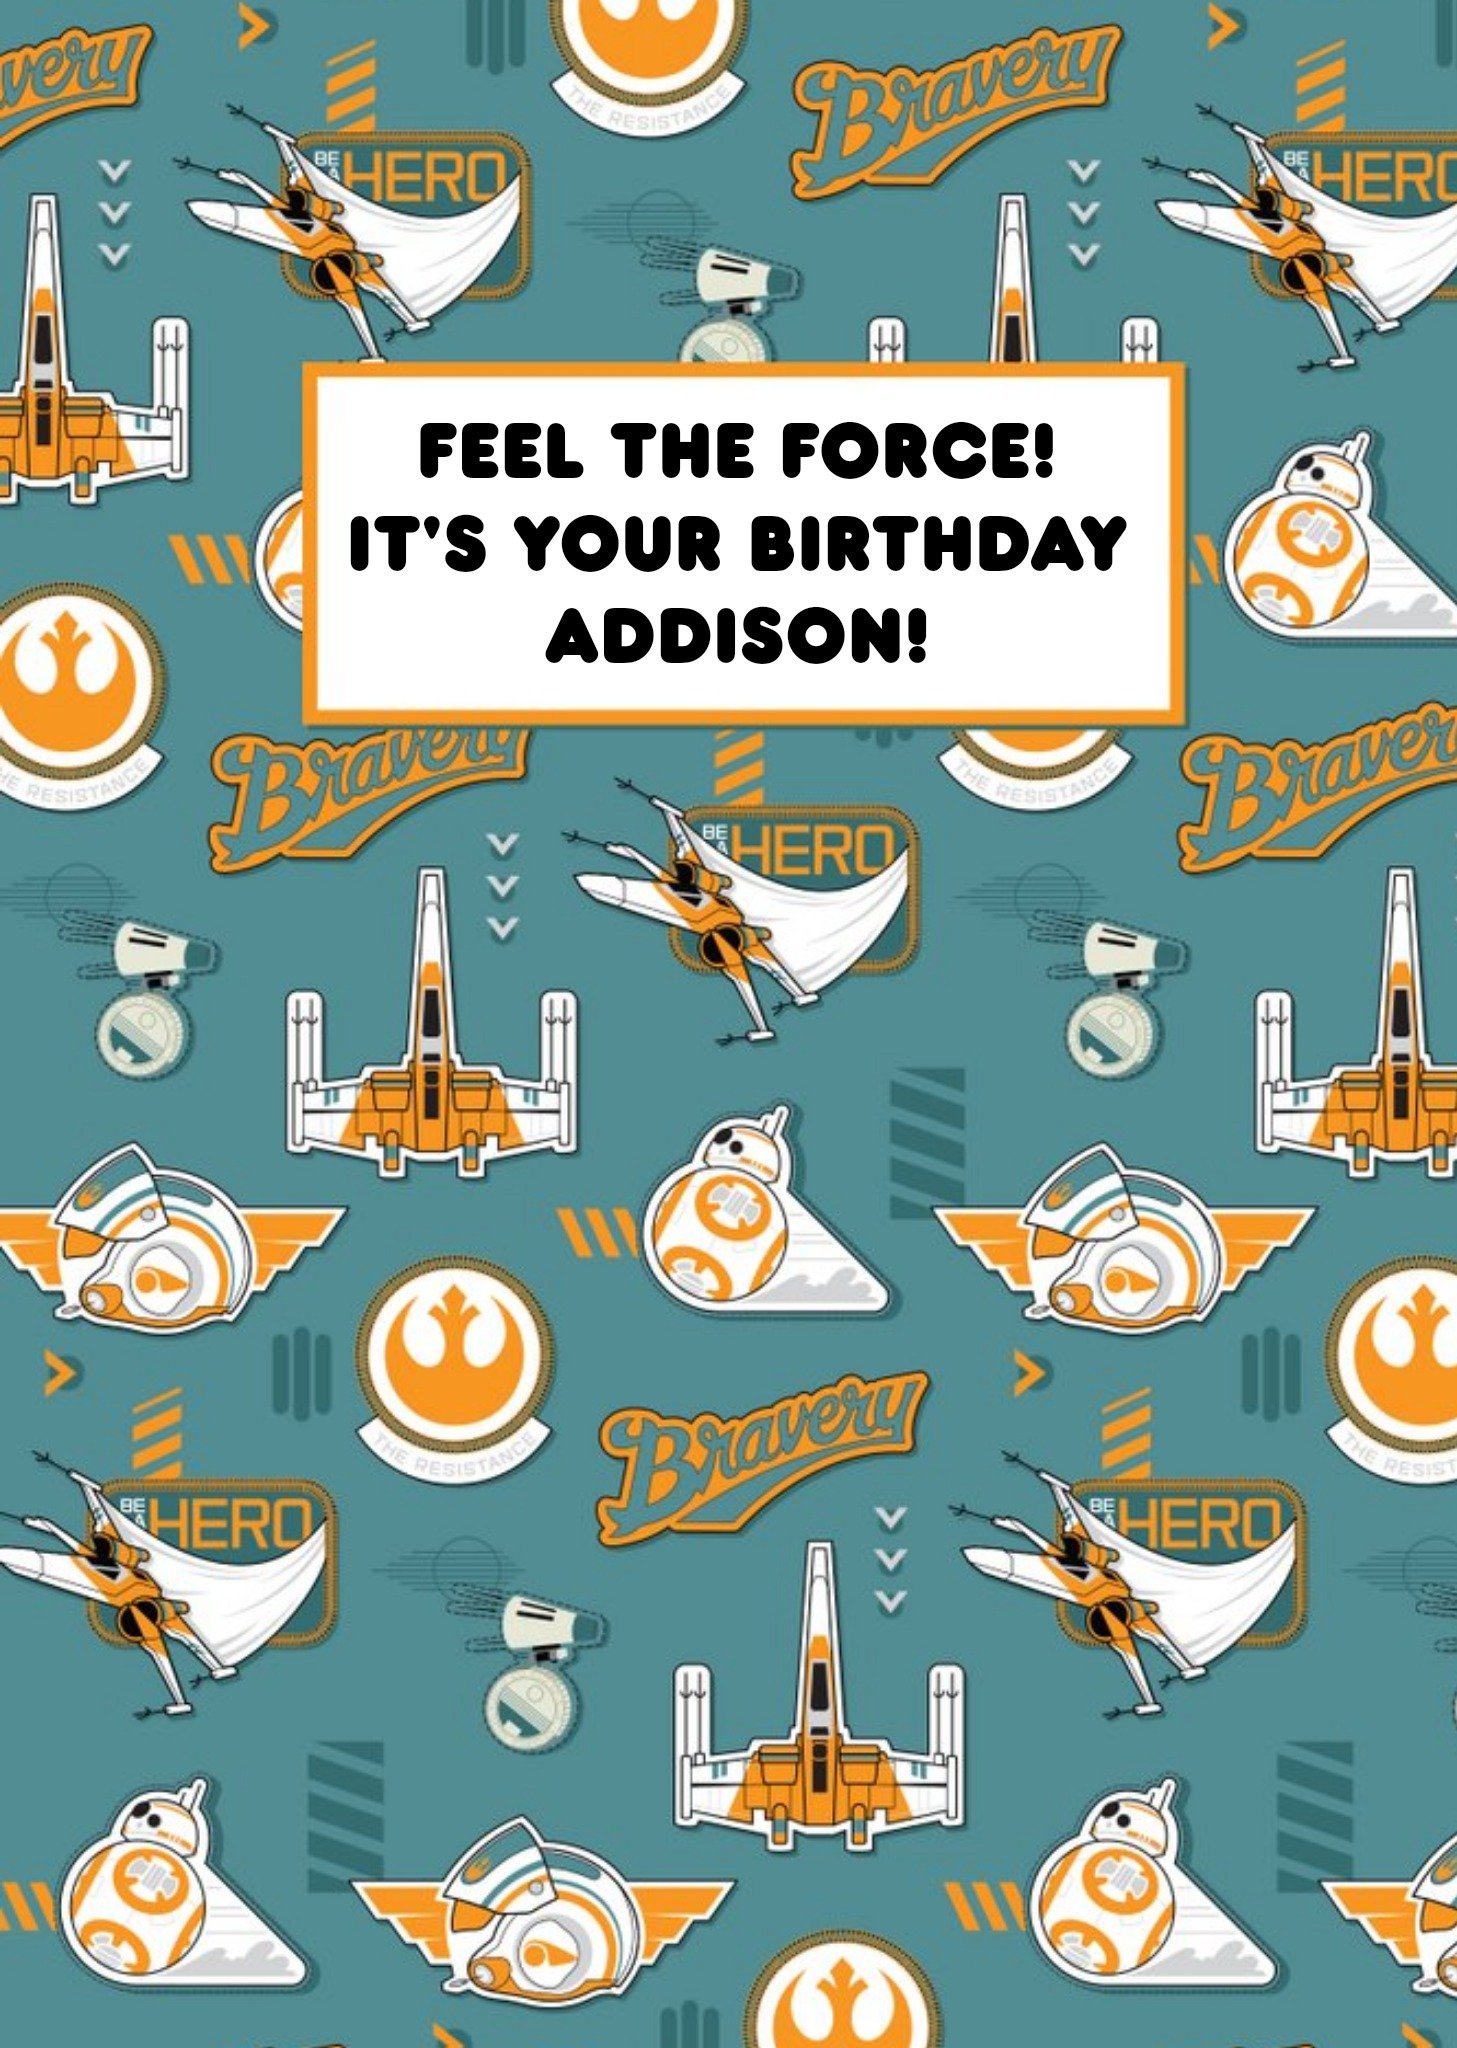 Disney Star Wars Episode 9 The Rise Of Skywalker Feel The Force Personalised Birthday Card, Large